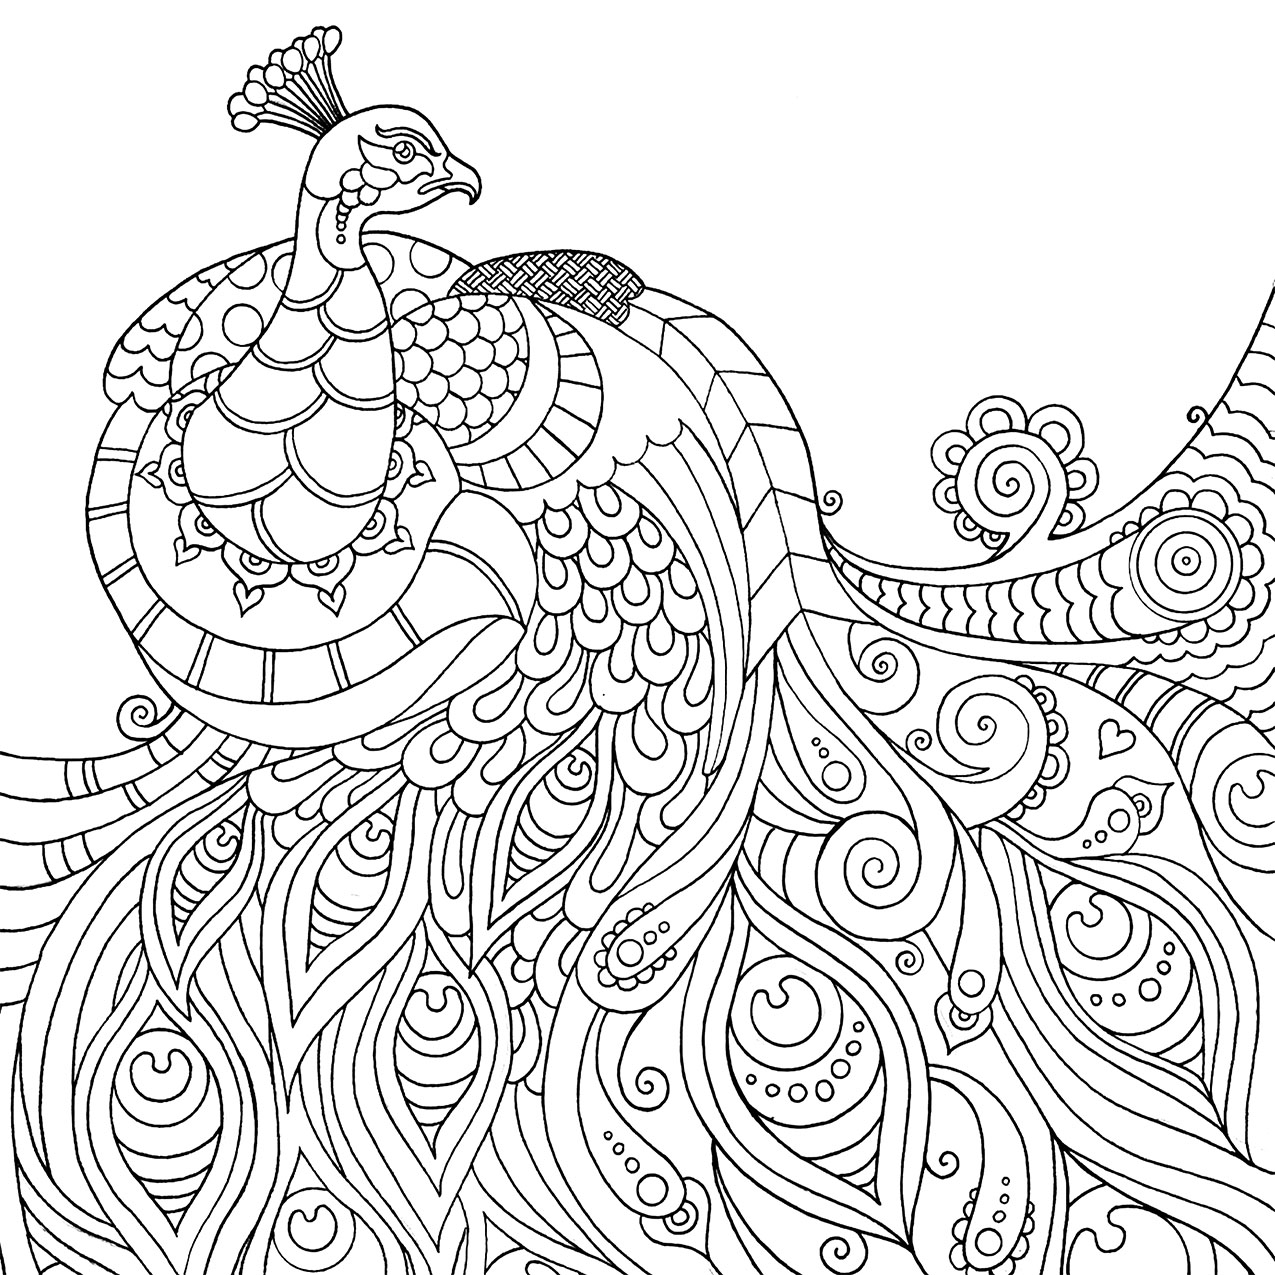 Free Mindfulness Colouring Printables